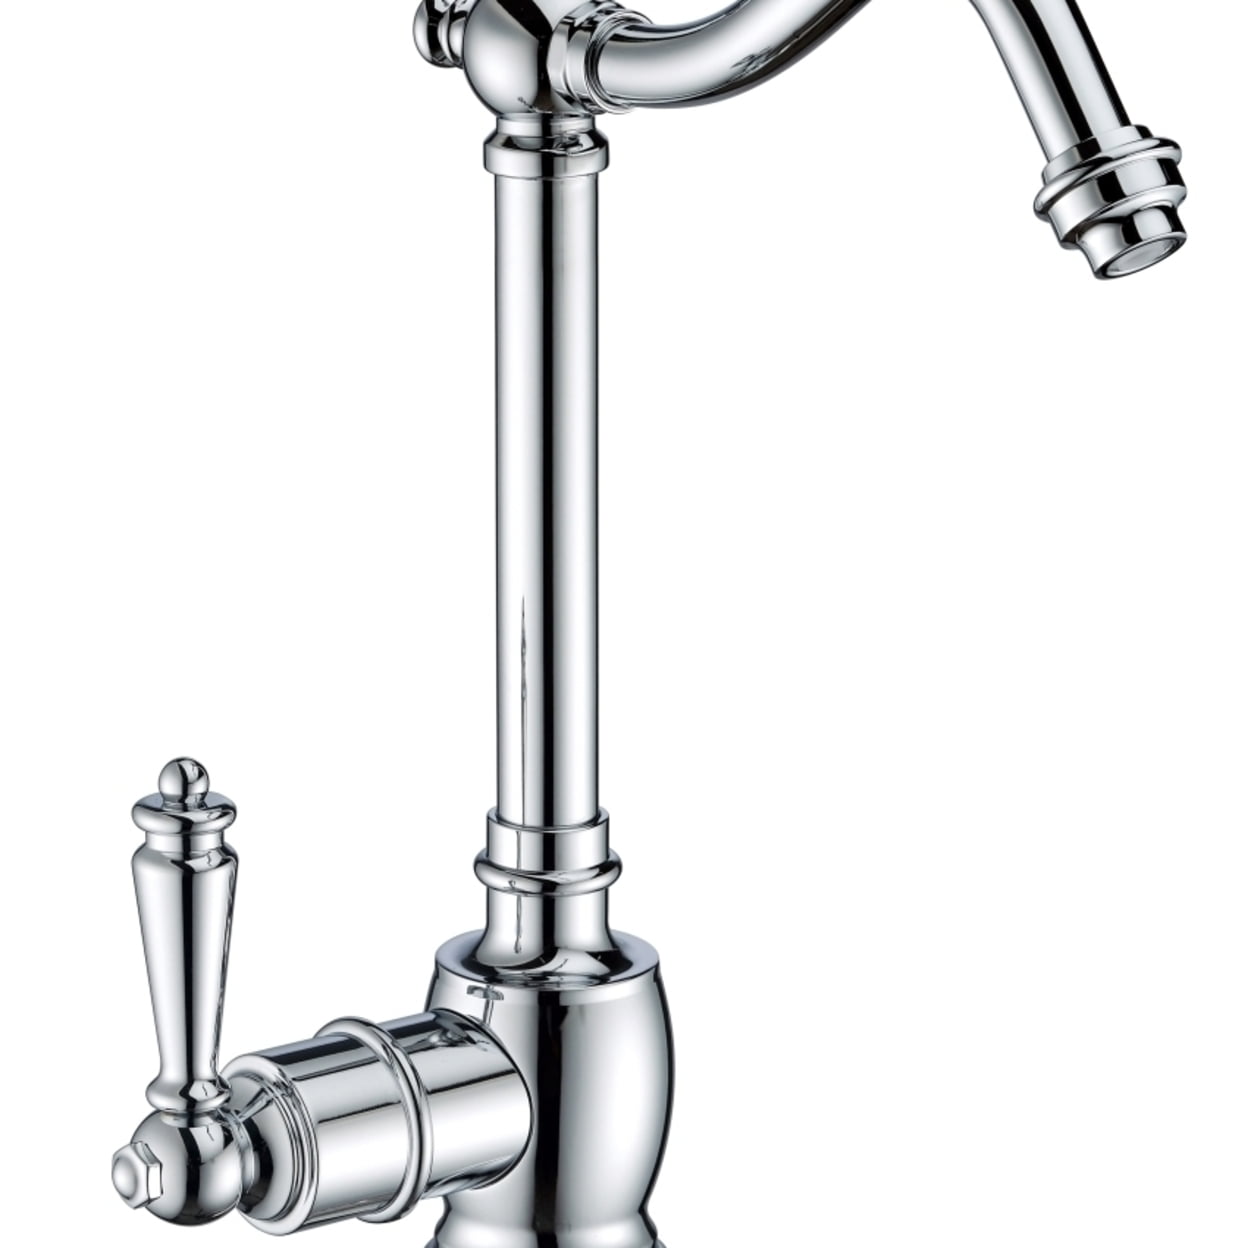 Point of Use Instant Hot Water Drinking Faucet with Traditional Swivel Spout - Polished Chrome -  LivingQuarters, LI2750614